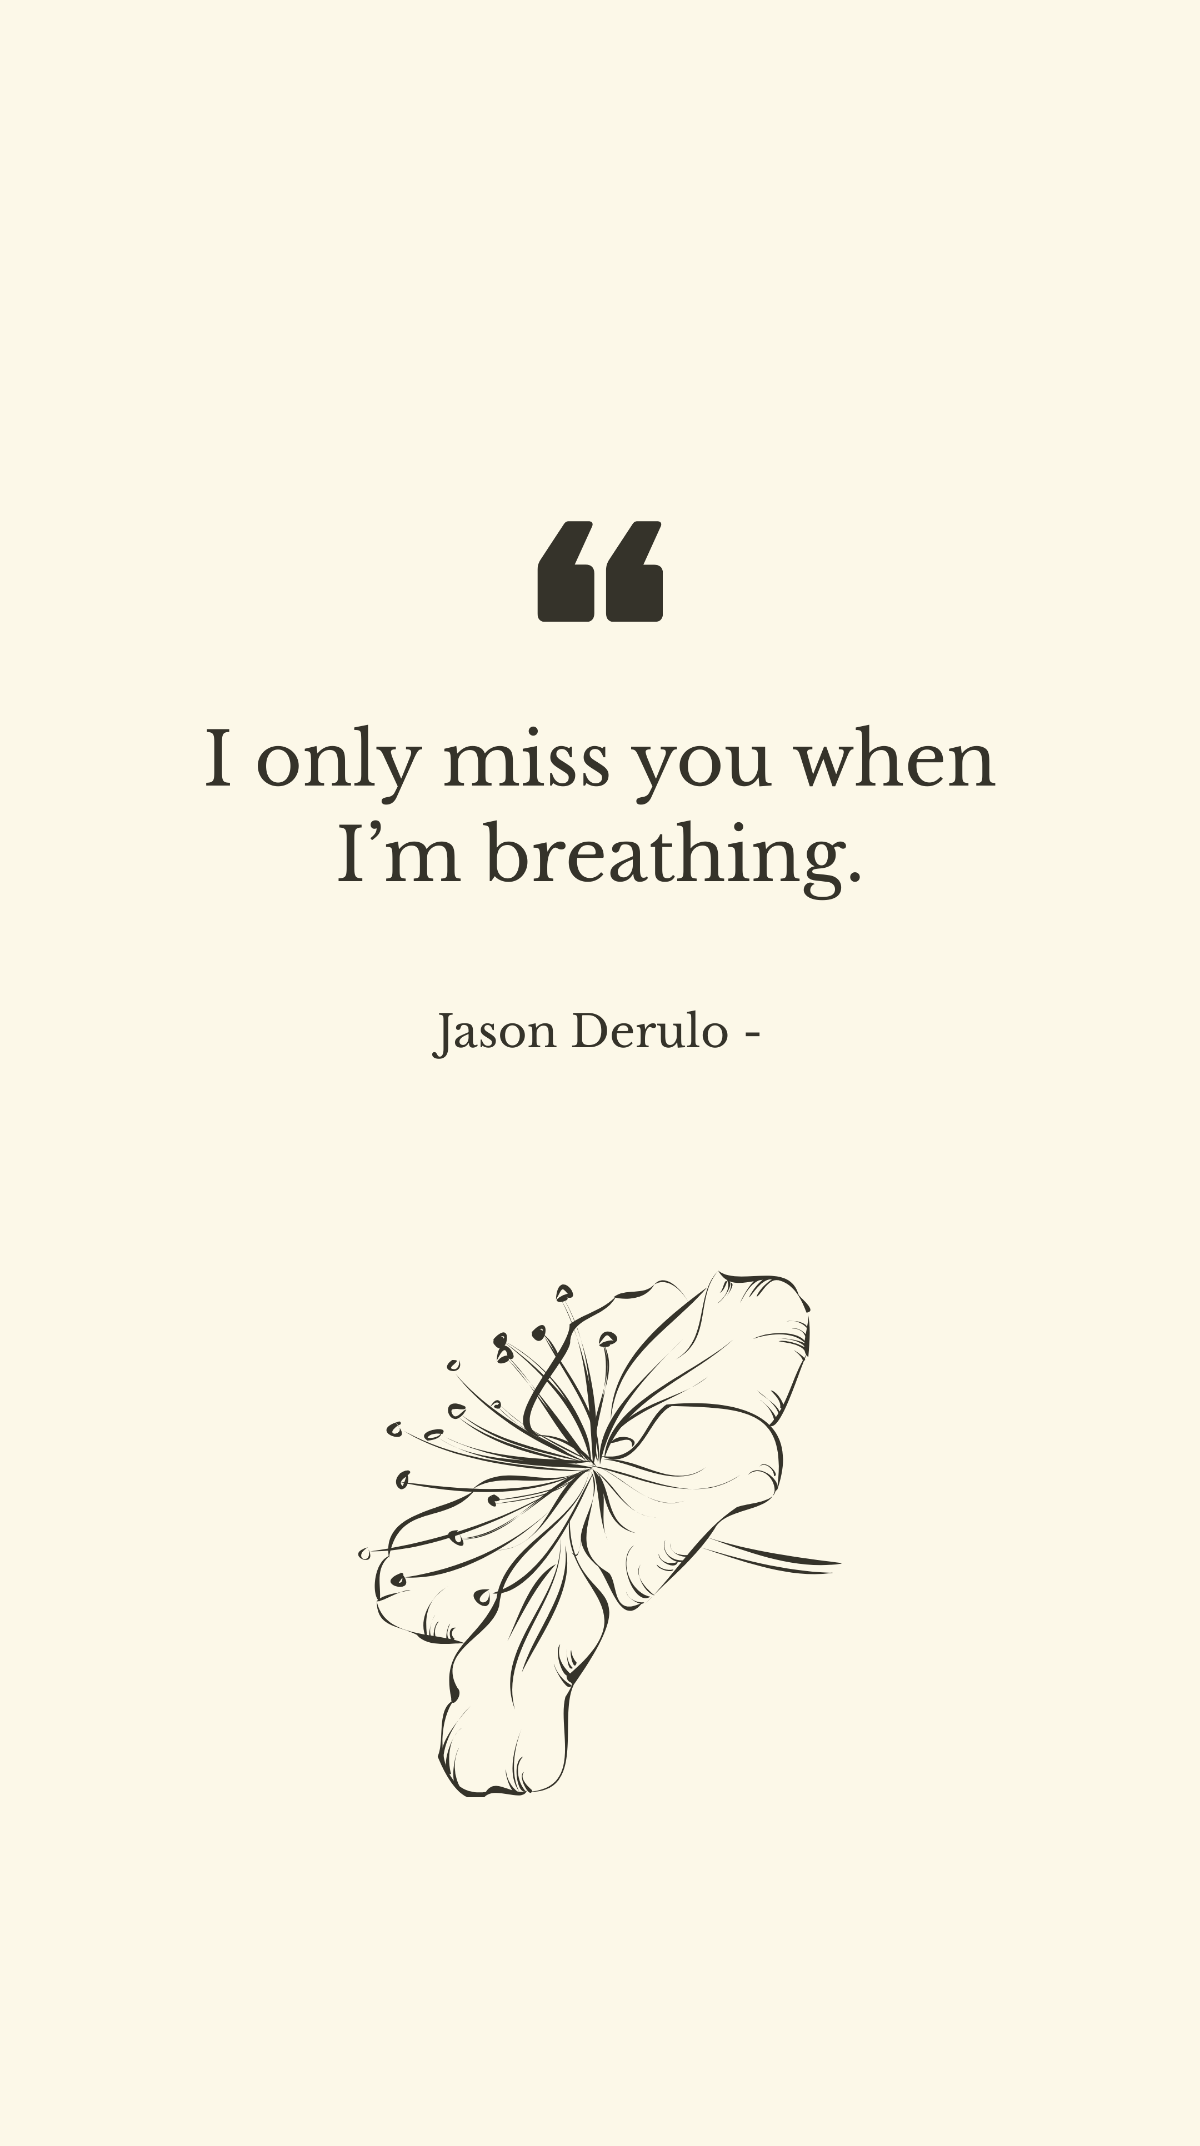 Jason Derulo - I only miss you when I’m breathing.